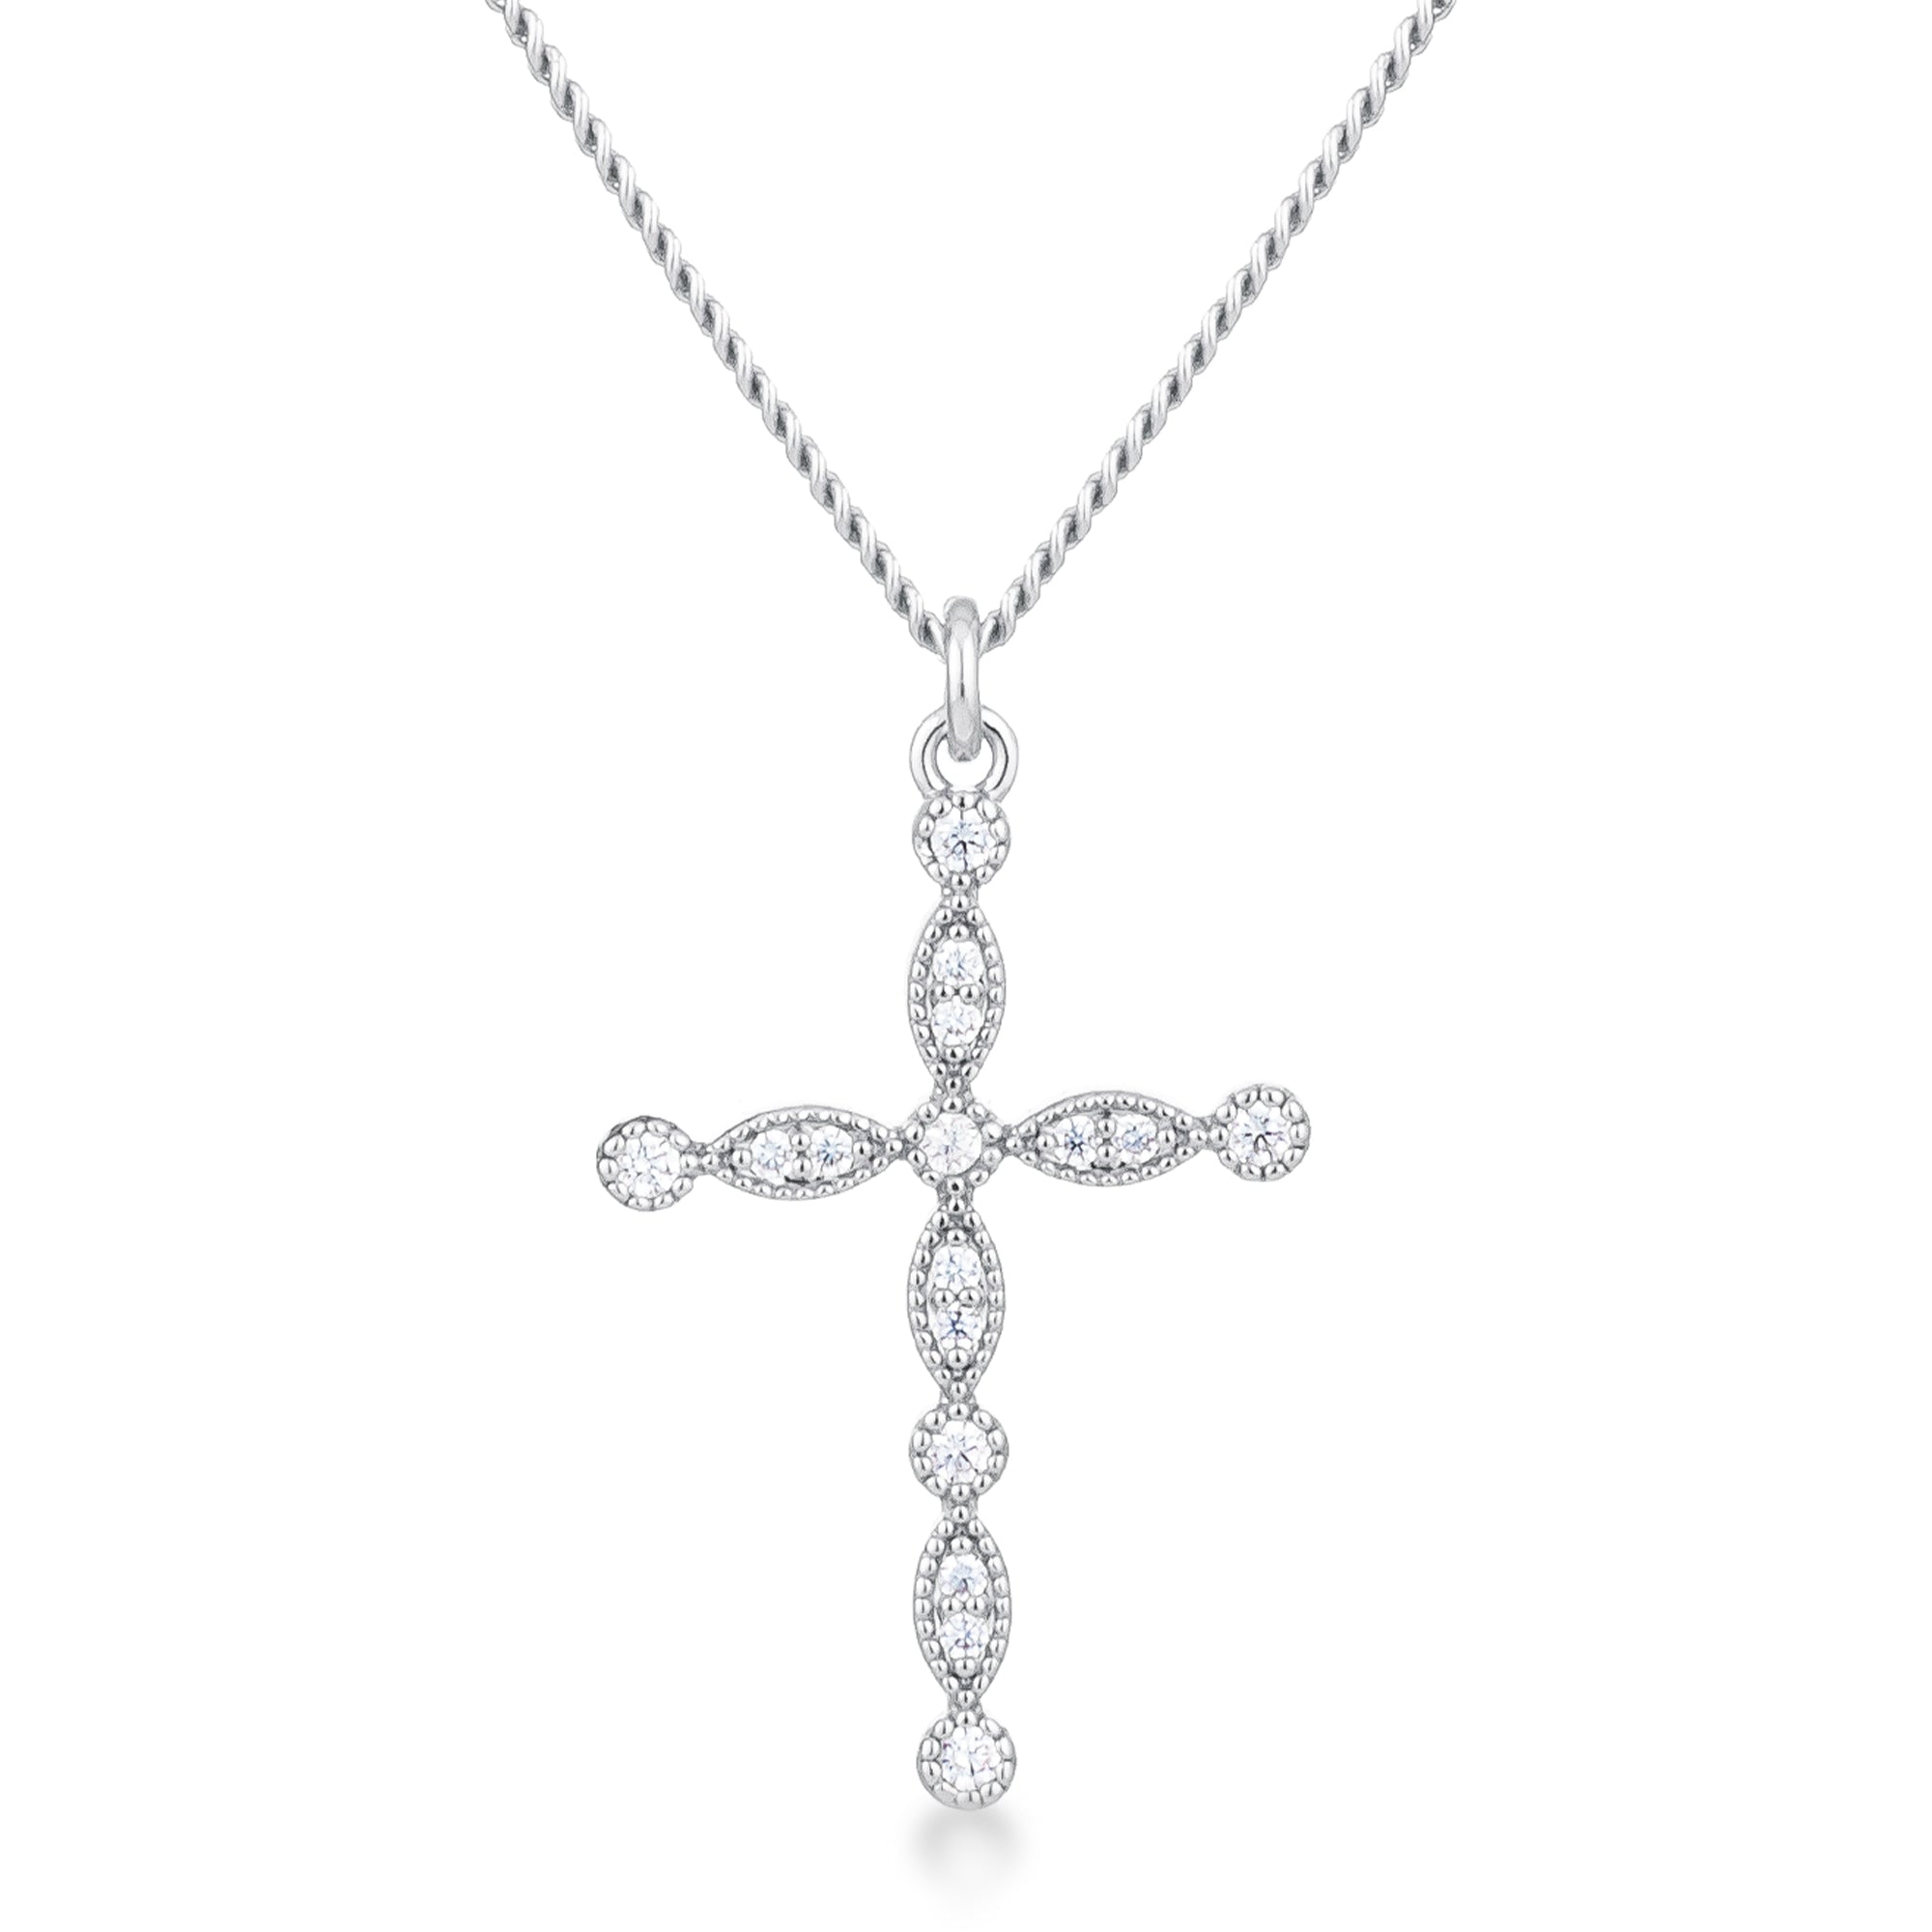 Delicate Vintage Rhodium Plated Clear CZ Cross Pendant - LinkagejewelrydesignLinkagejewelrydesign